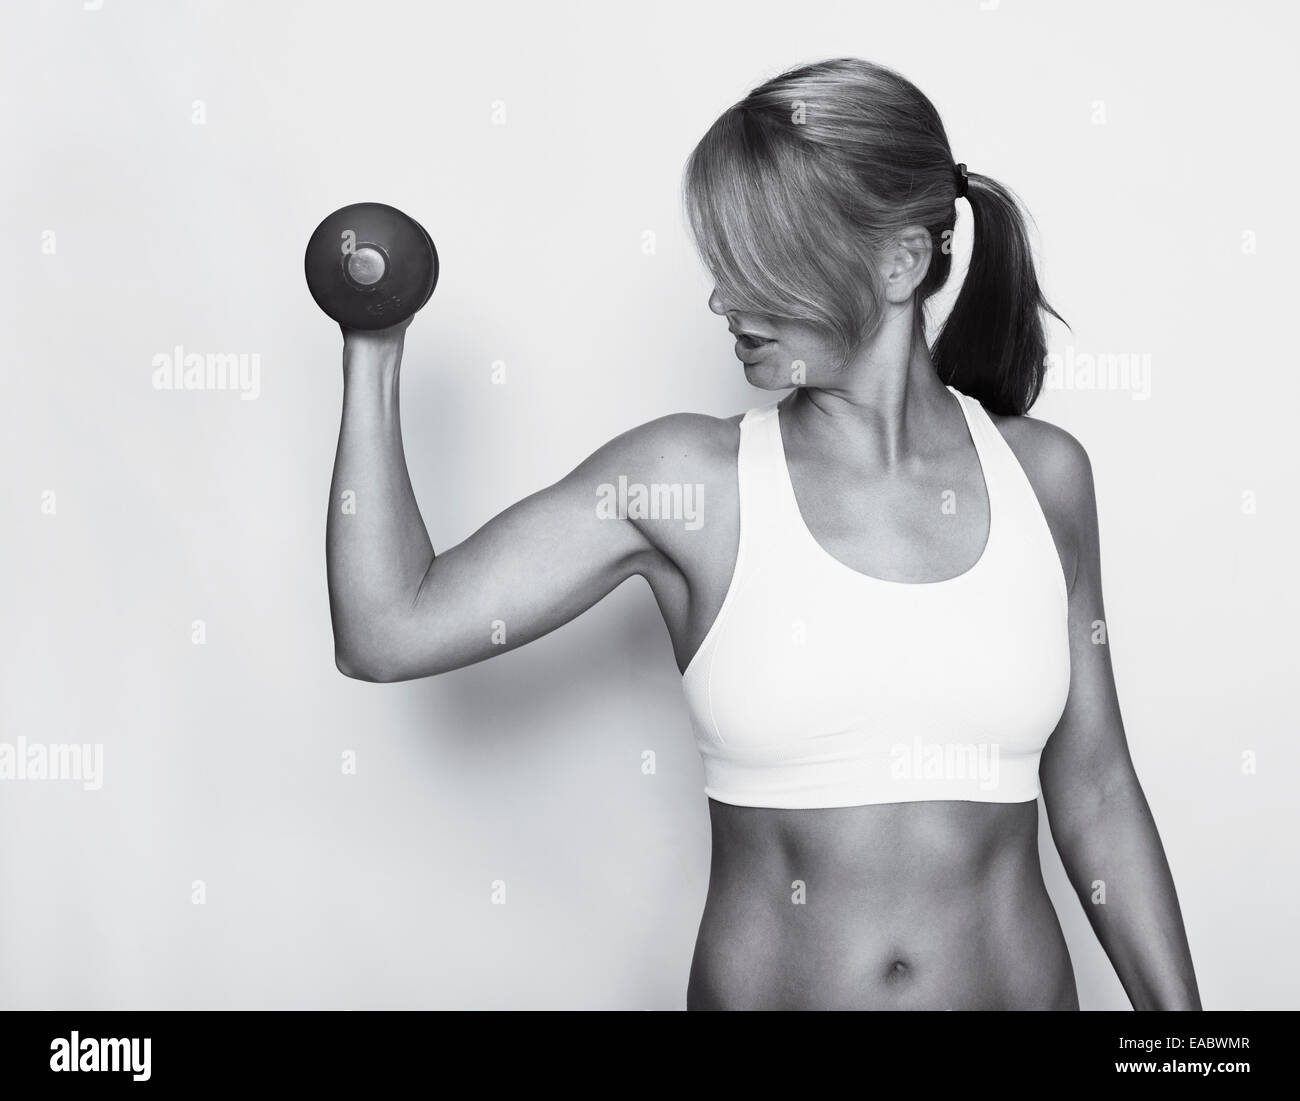 a woman in a white sports top trained their upper arms with dumbbells, black and white Stock Photo